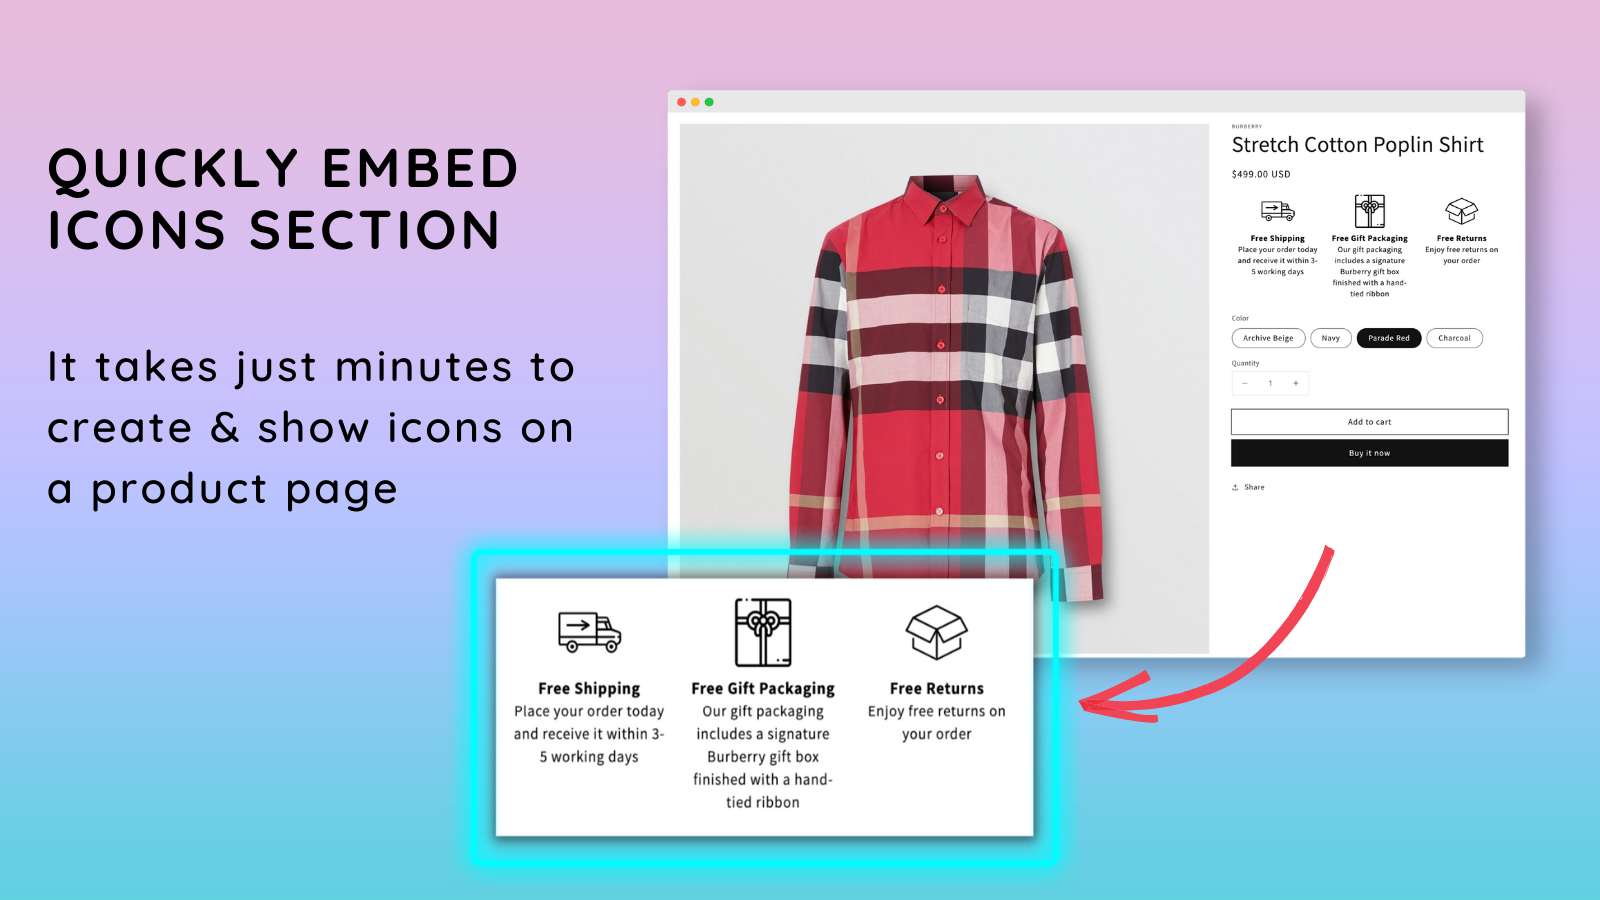 Quickly embed icons section